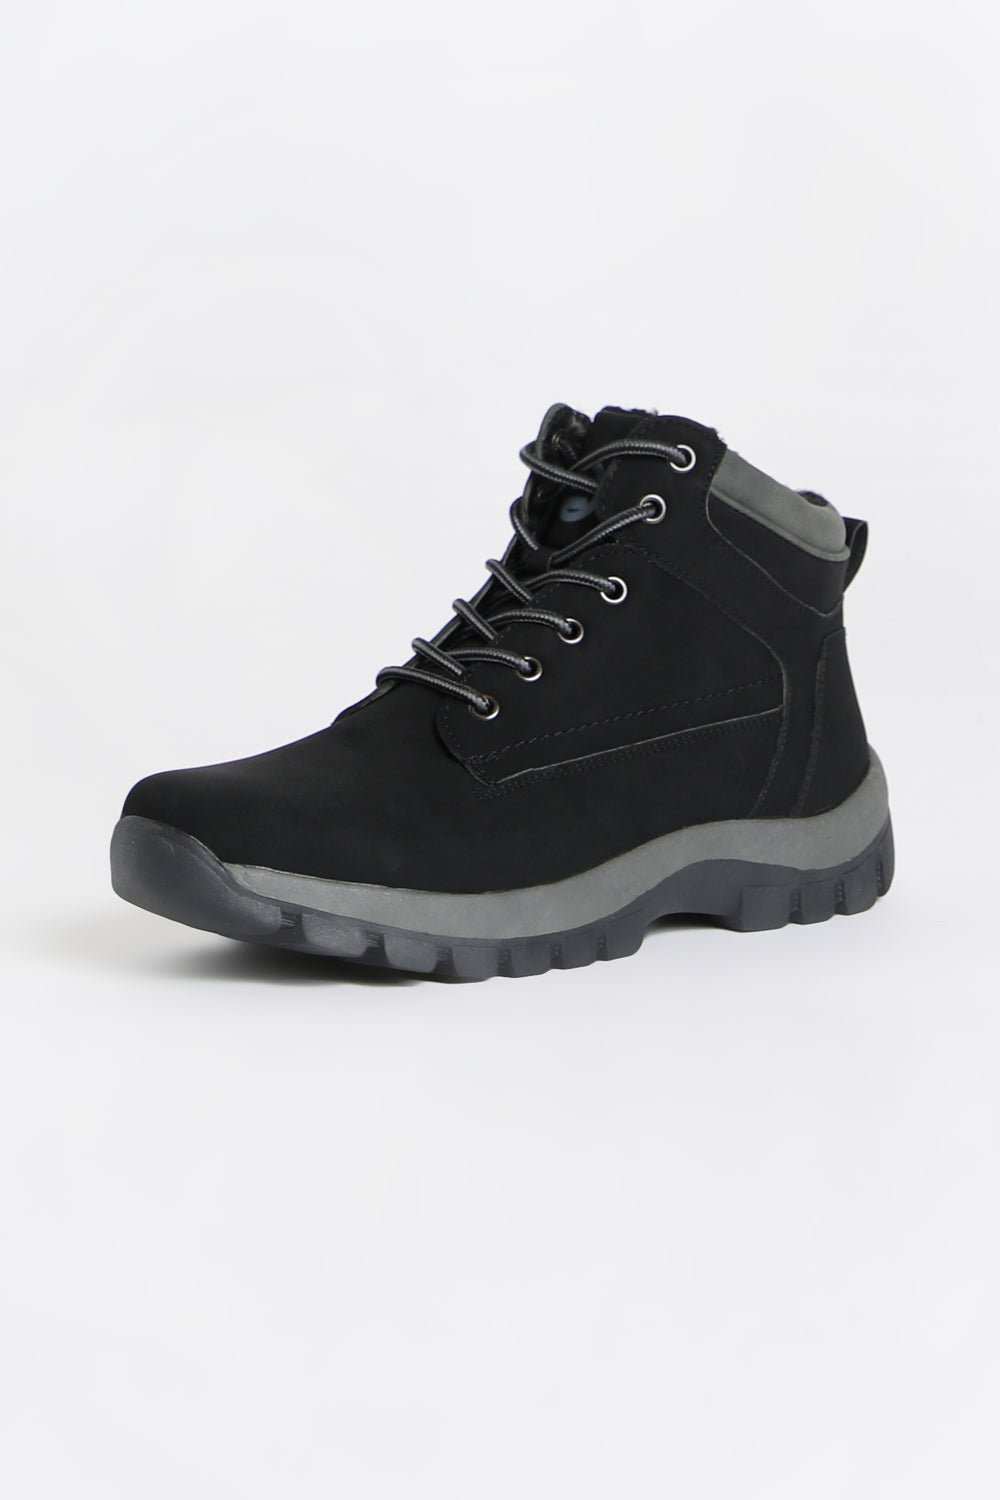 Mens Hiker Boots with Faux Fur Mens Hiker Boots with Faux Fur